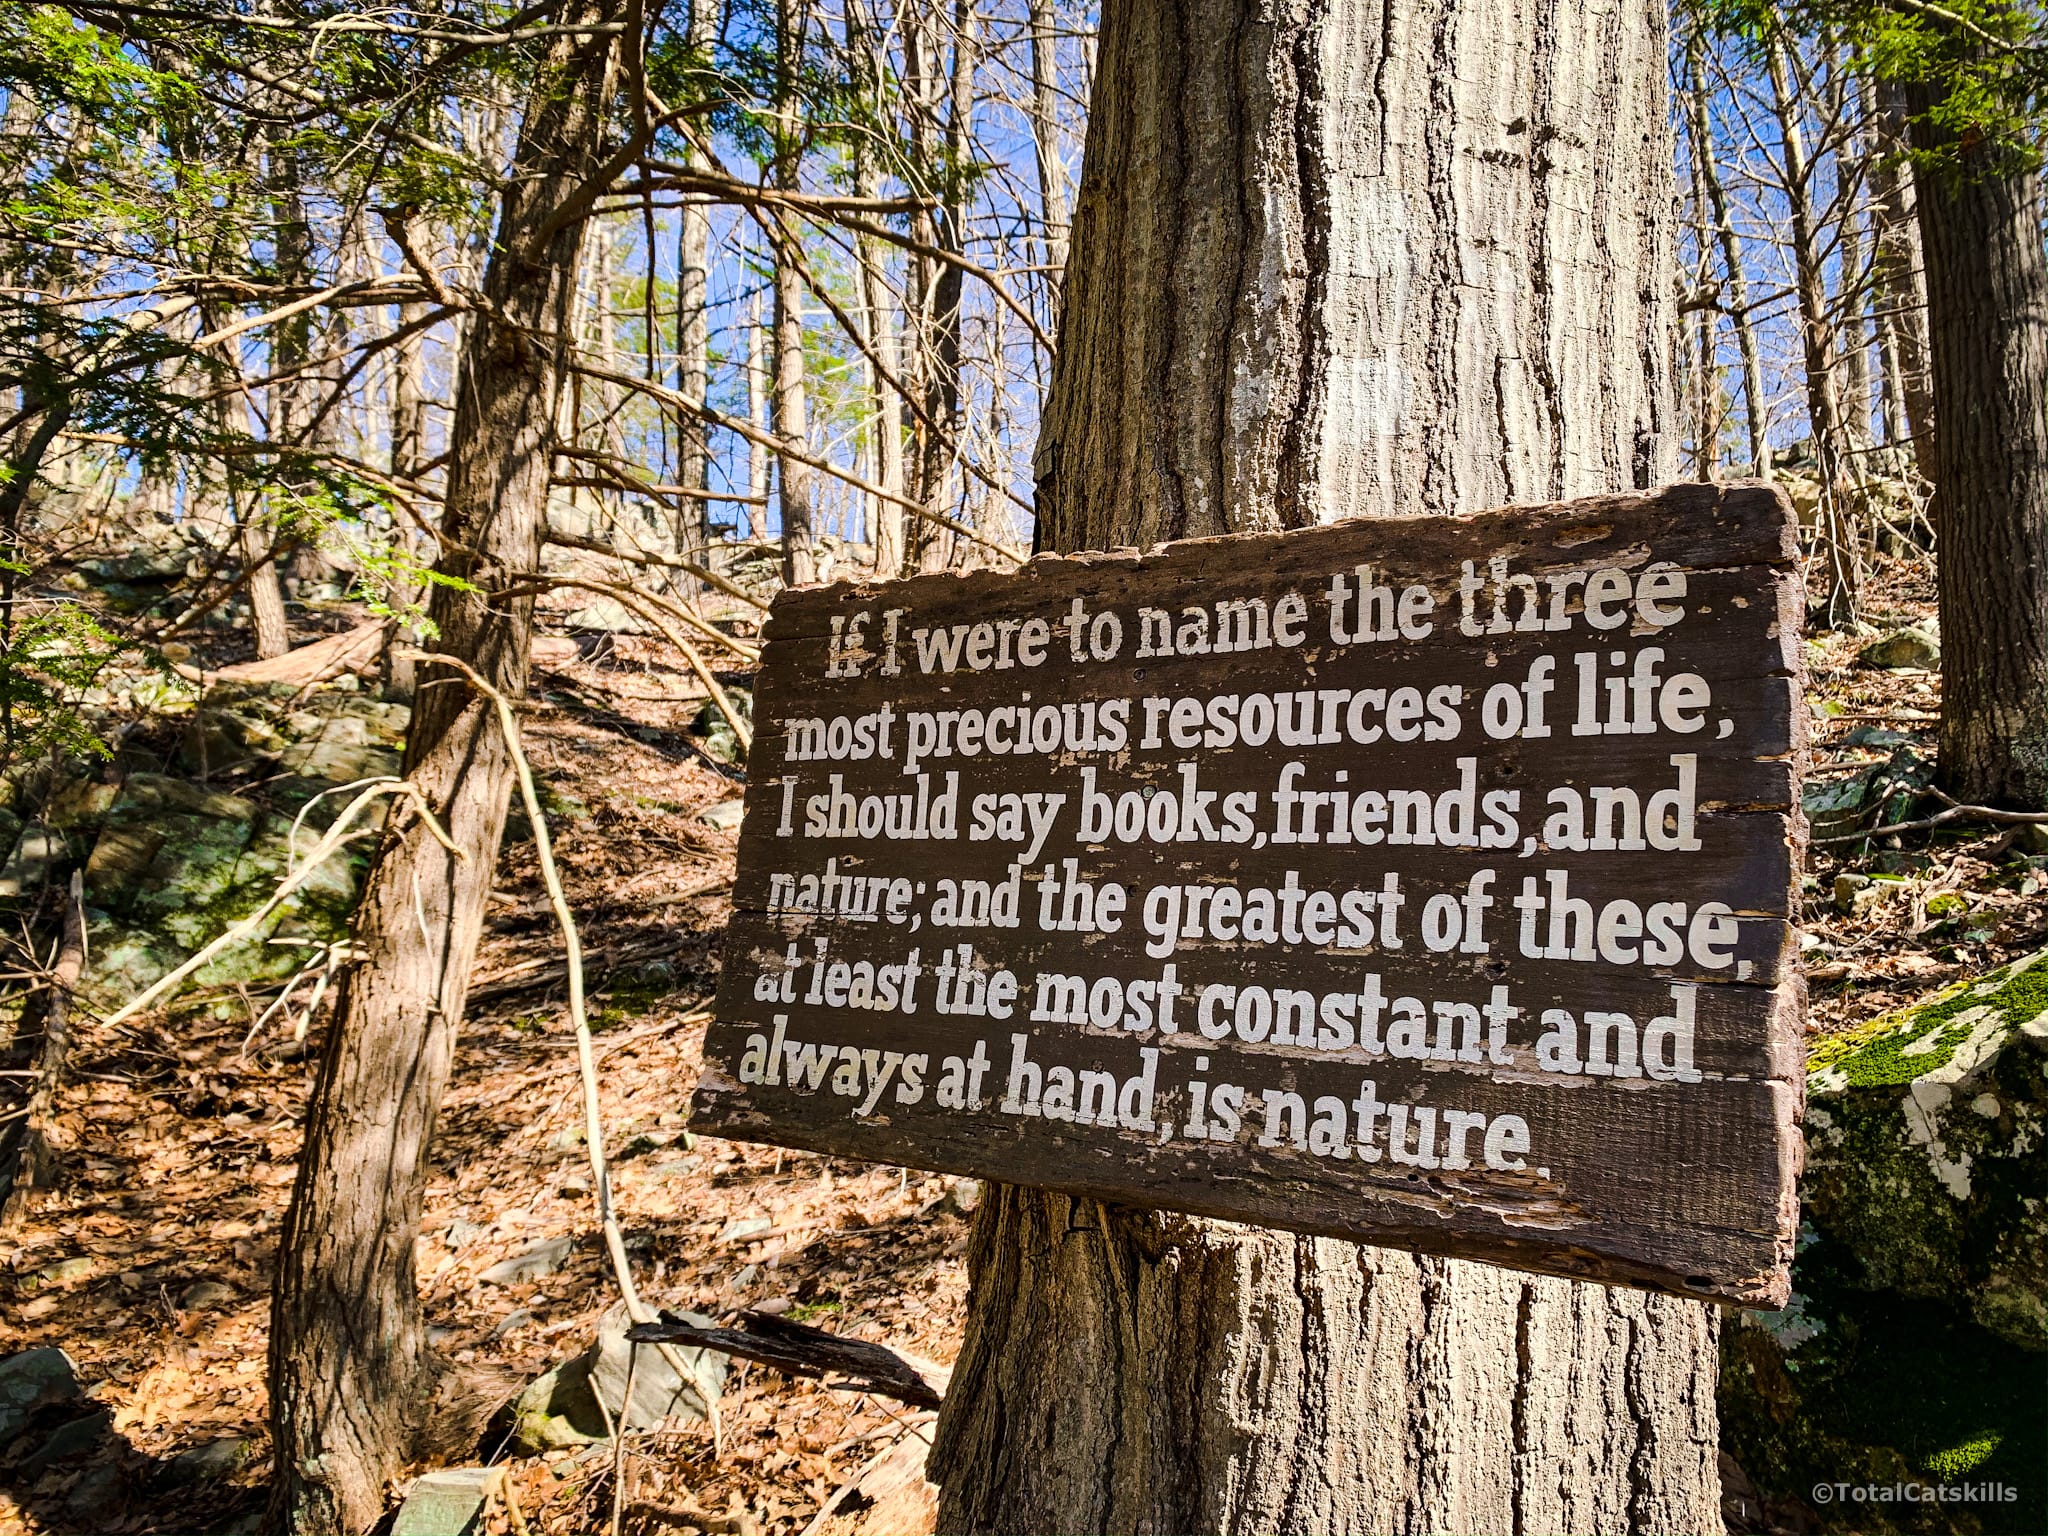 Burroughs quote on a wooden plaque